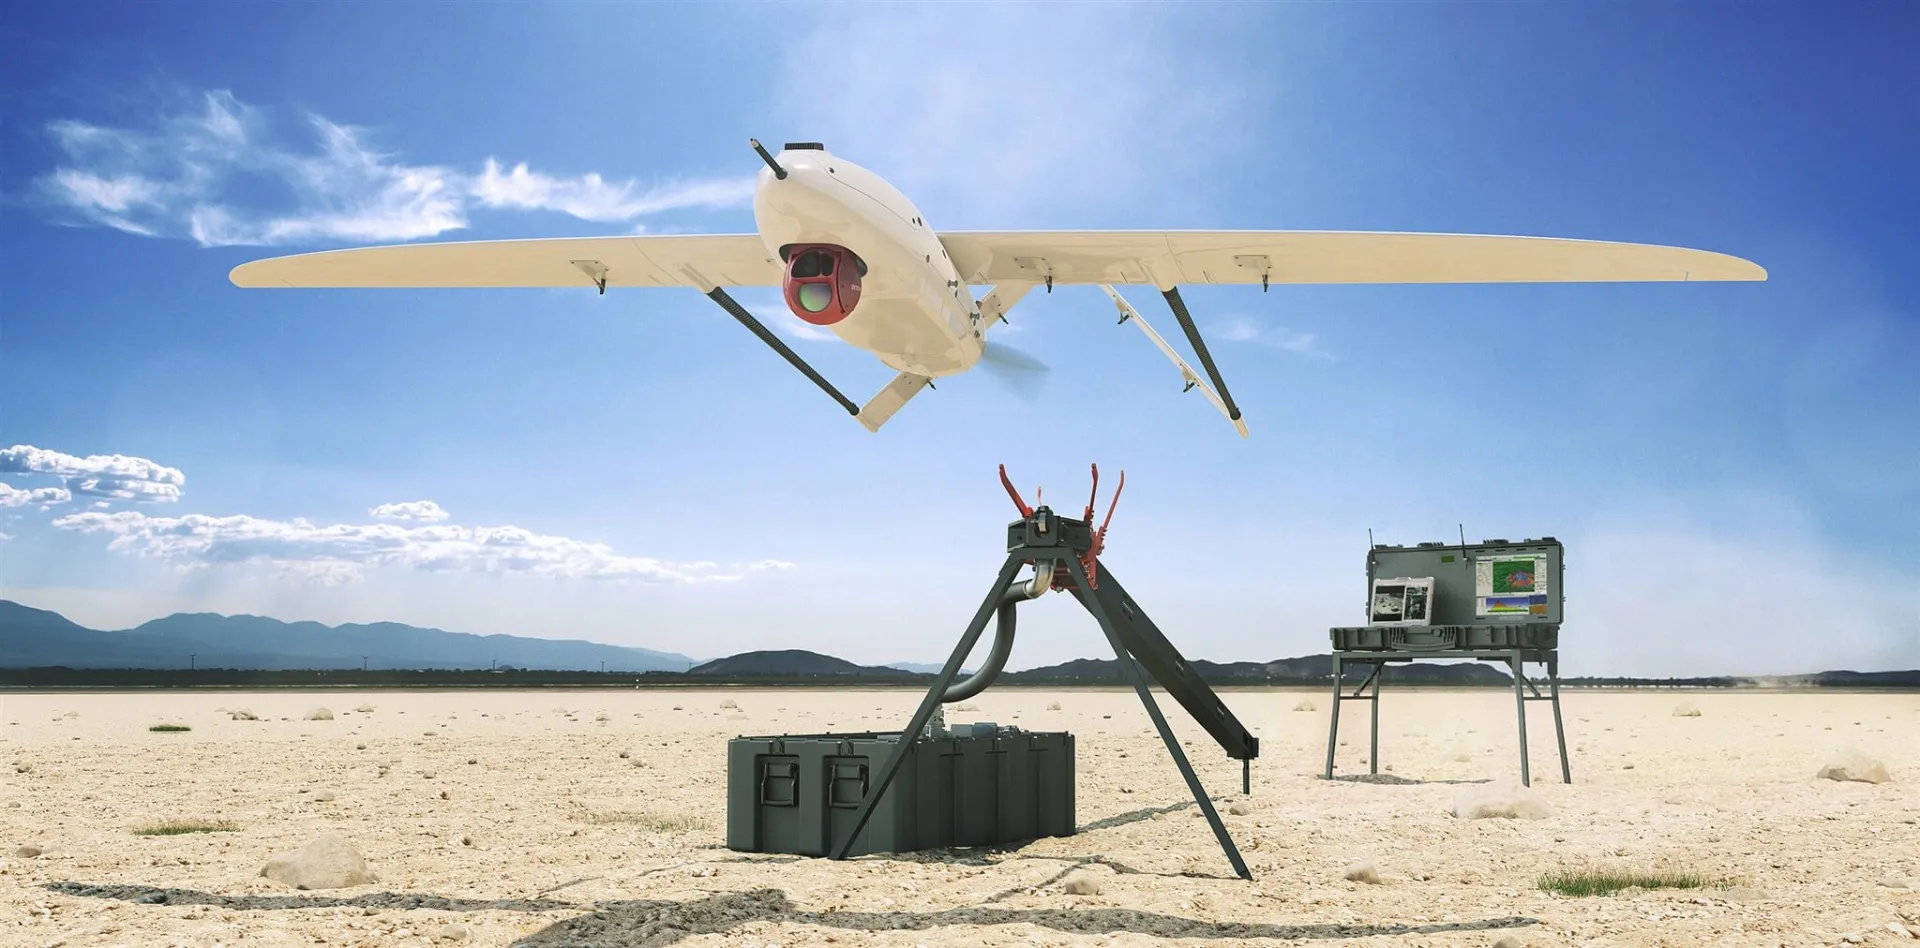 The U.S. Army will receive Penguin drones with flight speeds of 120 km/h and more than 20 hours of battery life